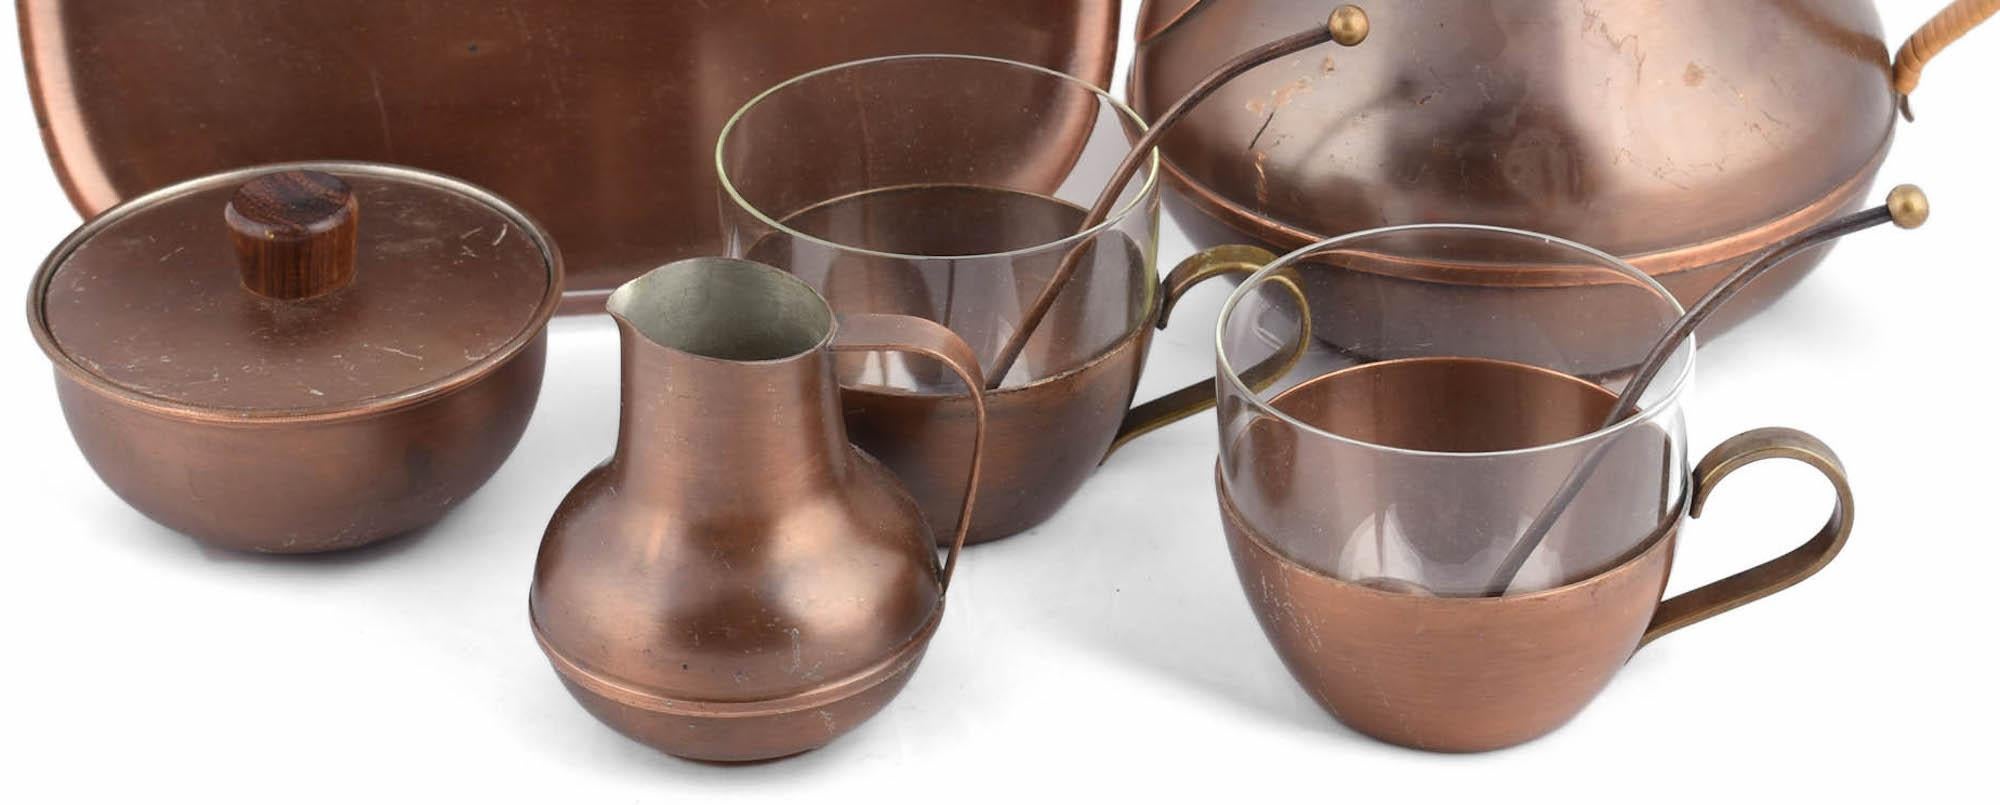 Tea Set is an original artwork realized in the 1950s. 

Original copper and glass. 

Handmade in Germany by Harald Buchrucker. 

The set is complete and includes: 1 jug, 1 tray, a cream server, a sugar bowl, 2 tea cups with glass insert and 2